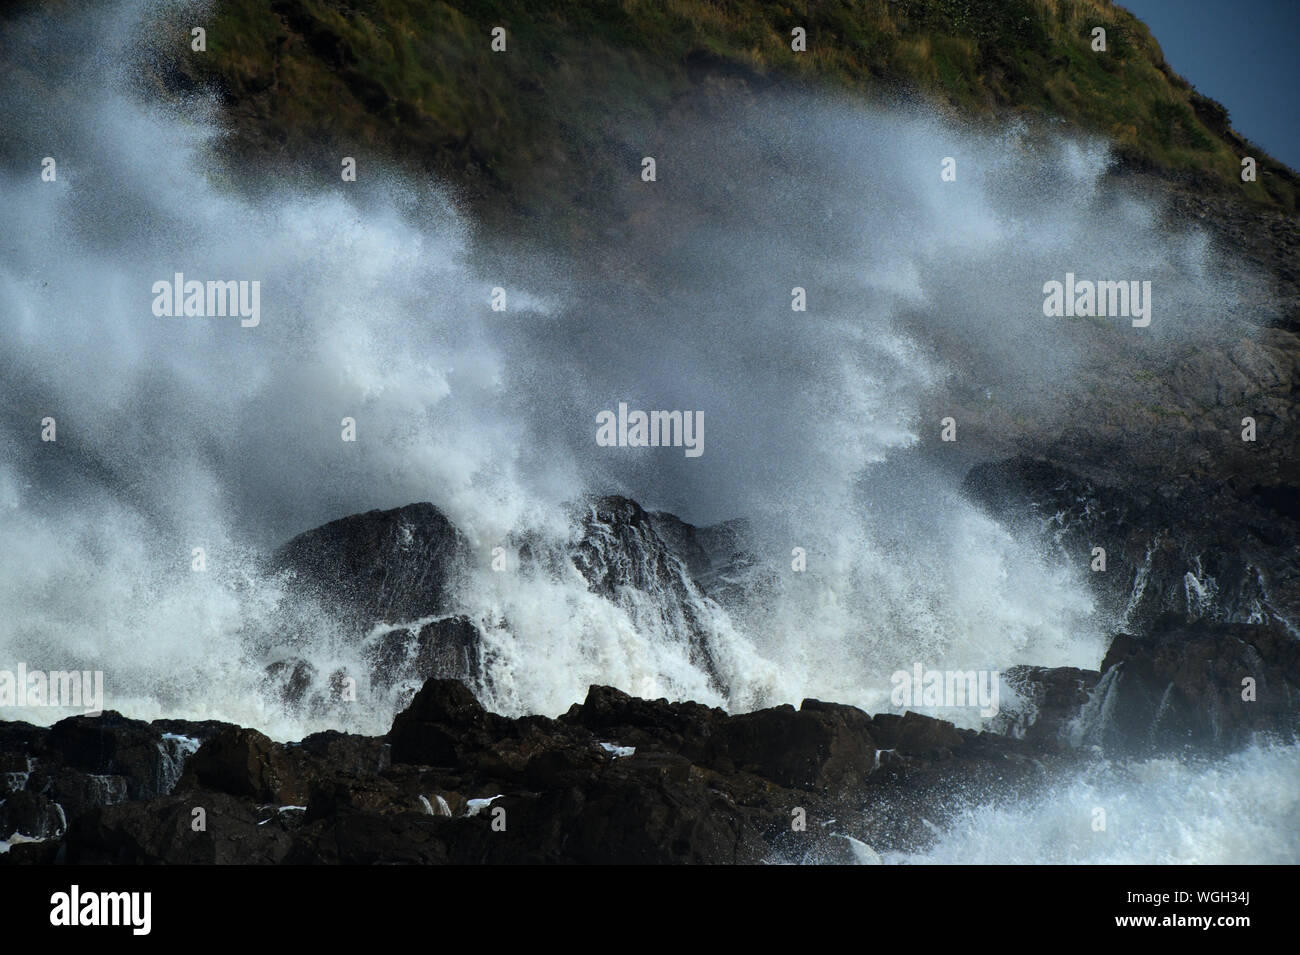 Large waves from storm surf smash into the cliffs sending spray high into the cliffs and vegetation Stock Photo